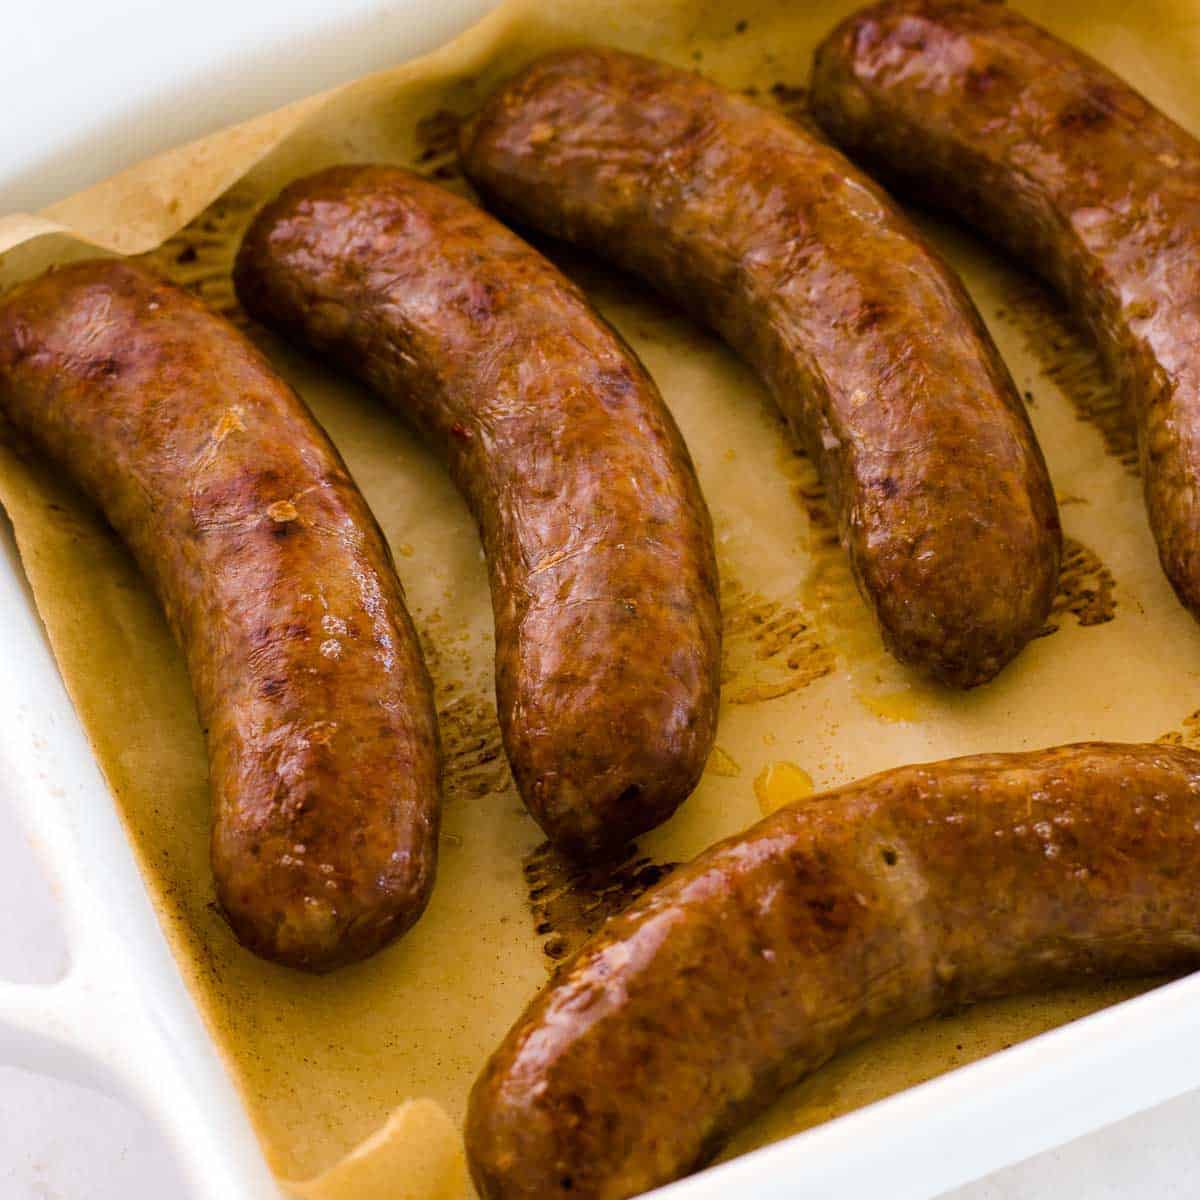 Sausages freshly cooked in the oven